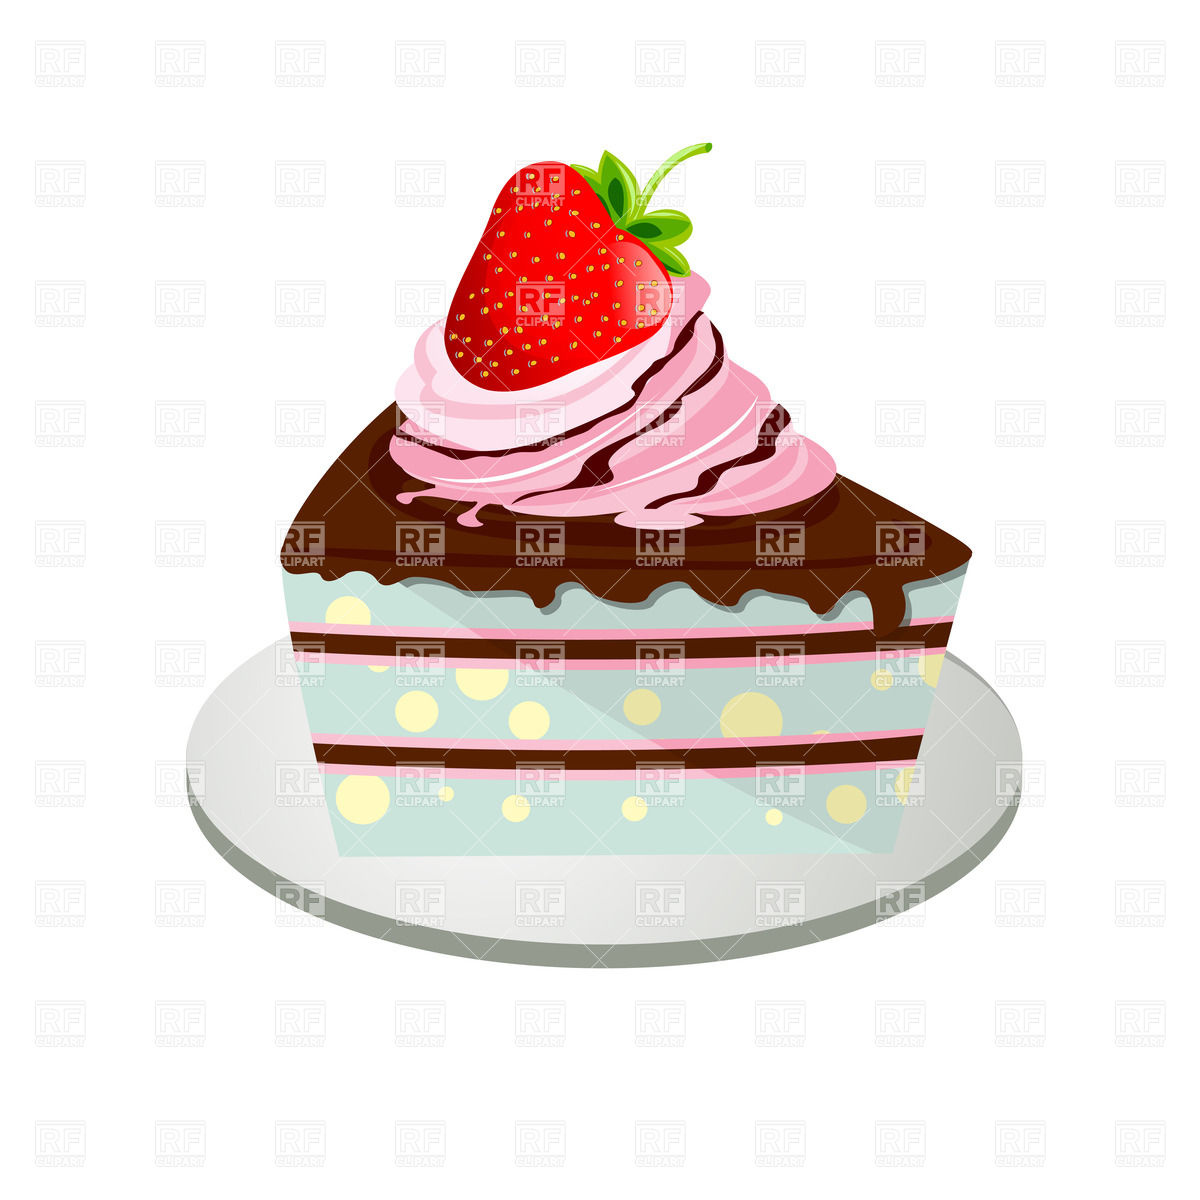 Cake Piece With Strawberry In Cream And Chocolate 20934 Download